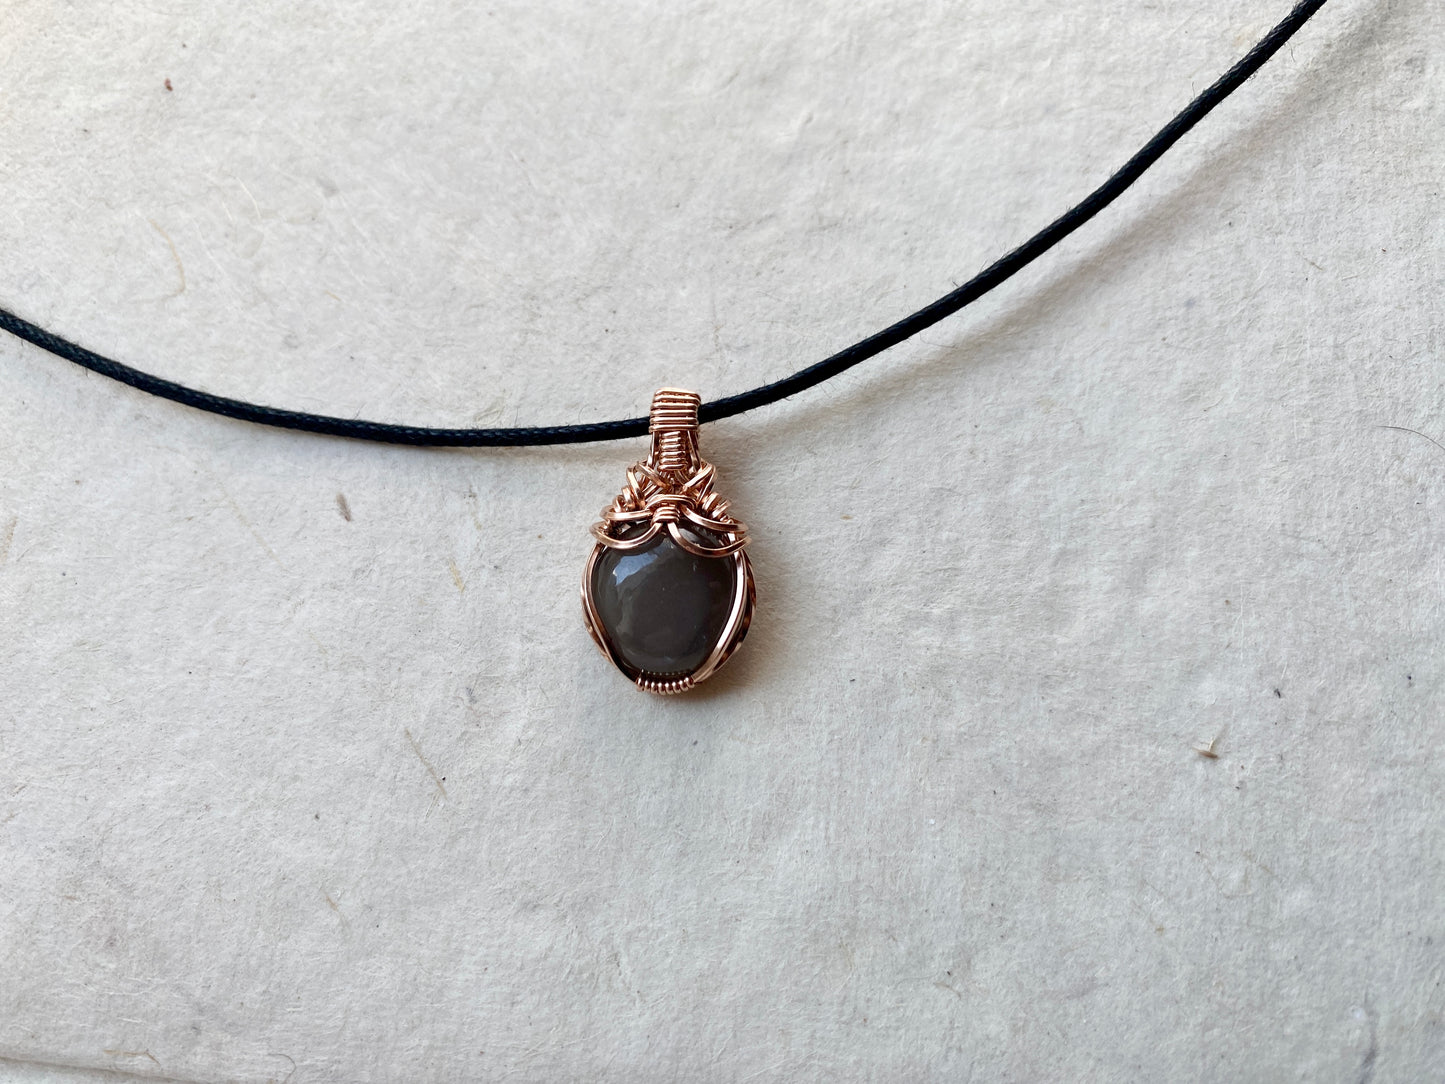 New Moon Wire Wrapped Gray Mini Moonstone Necklace - Original Design in 14K Rose Gold Fill Wire